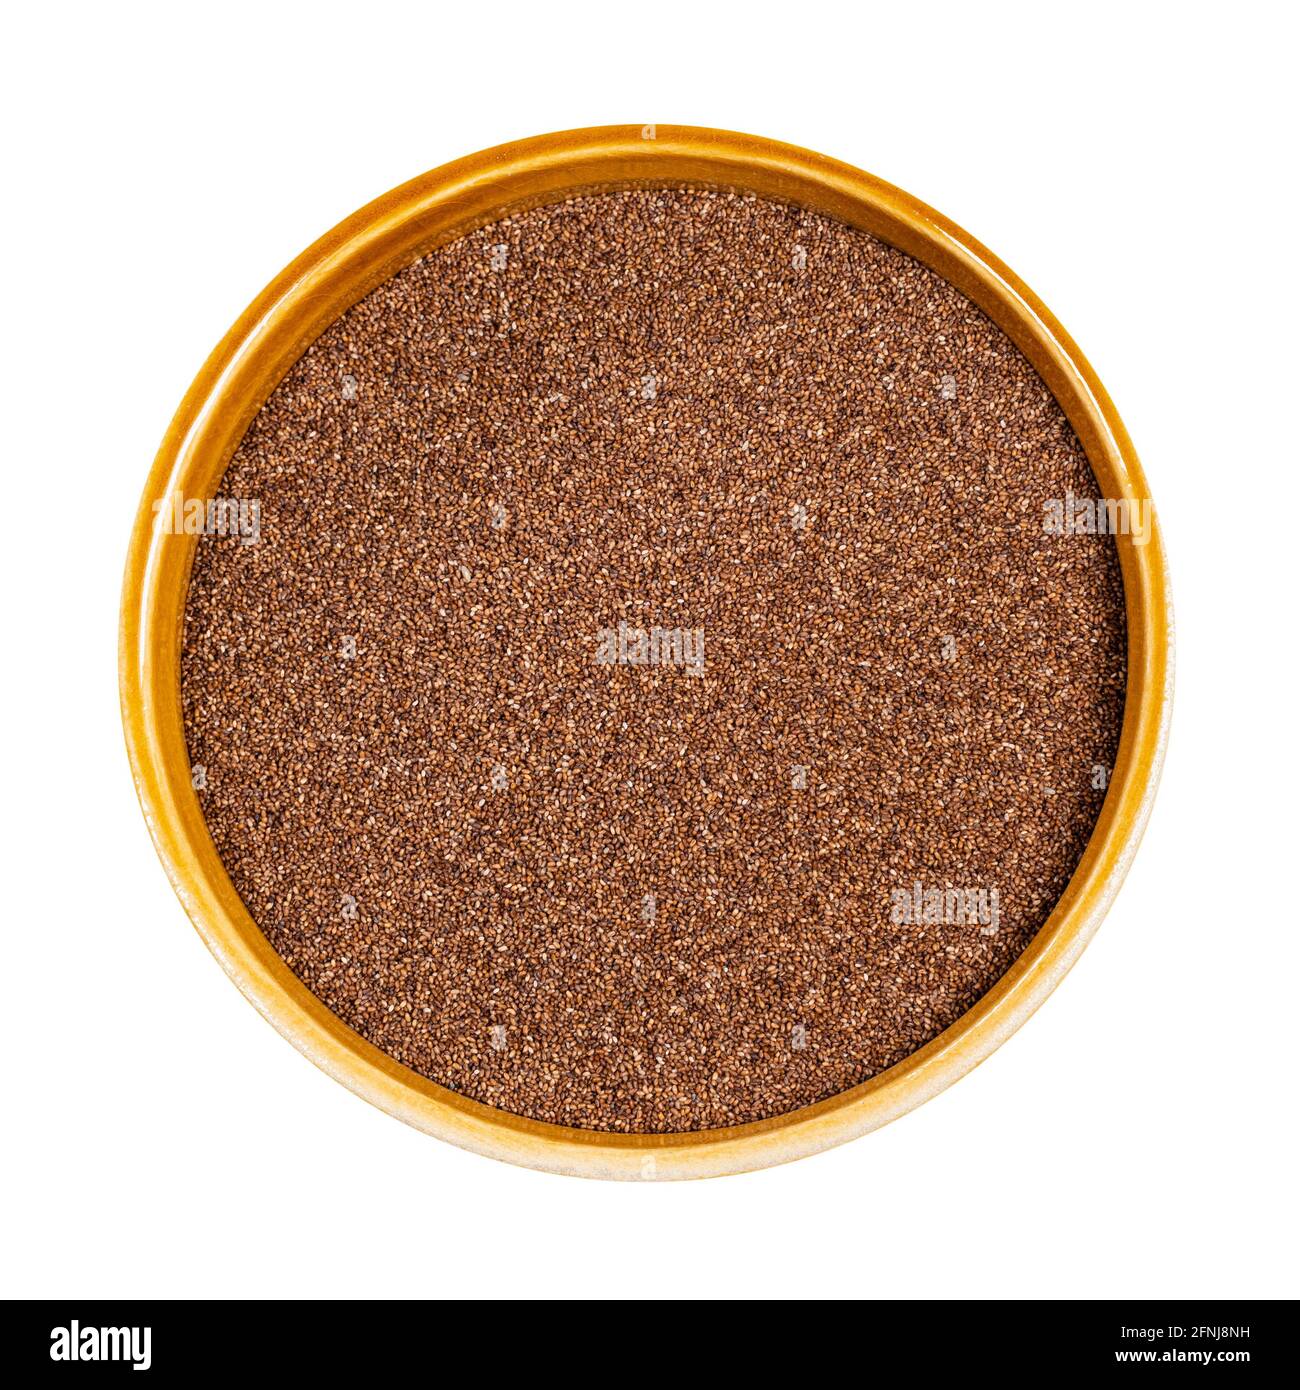 top view of wholegrain teff seeds in round ceramic bowl cutout on white background Stock Photo